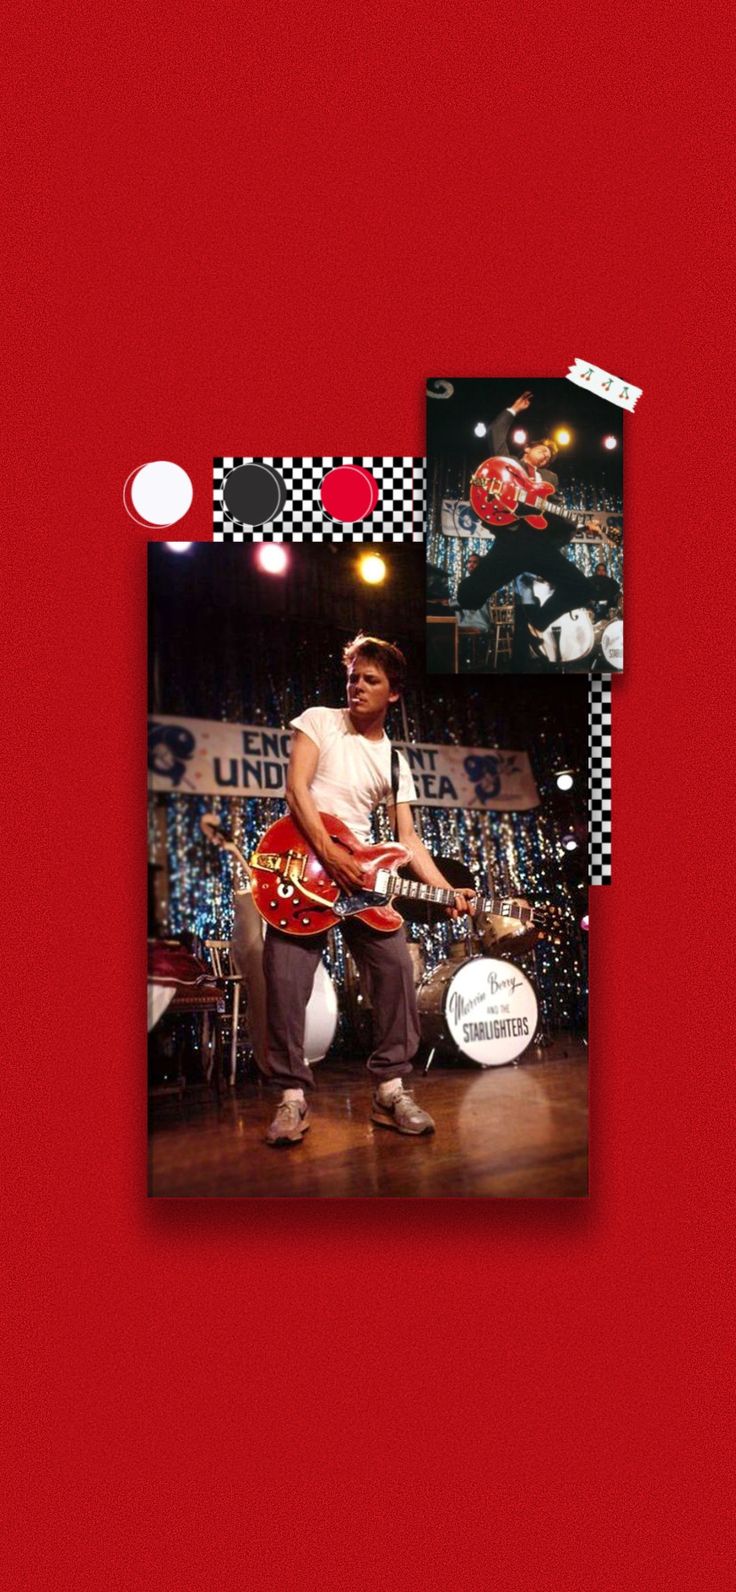 marty mcfly red aesthetic wallpaper 50s. Future wallpaper, Wallpaper, Marty mcfly